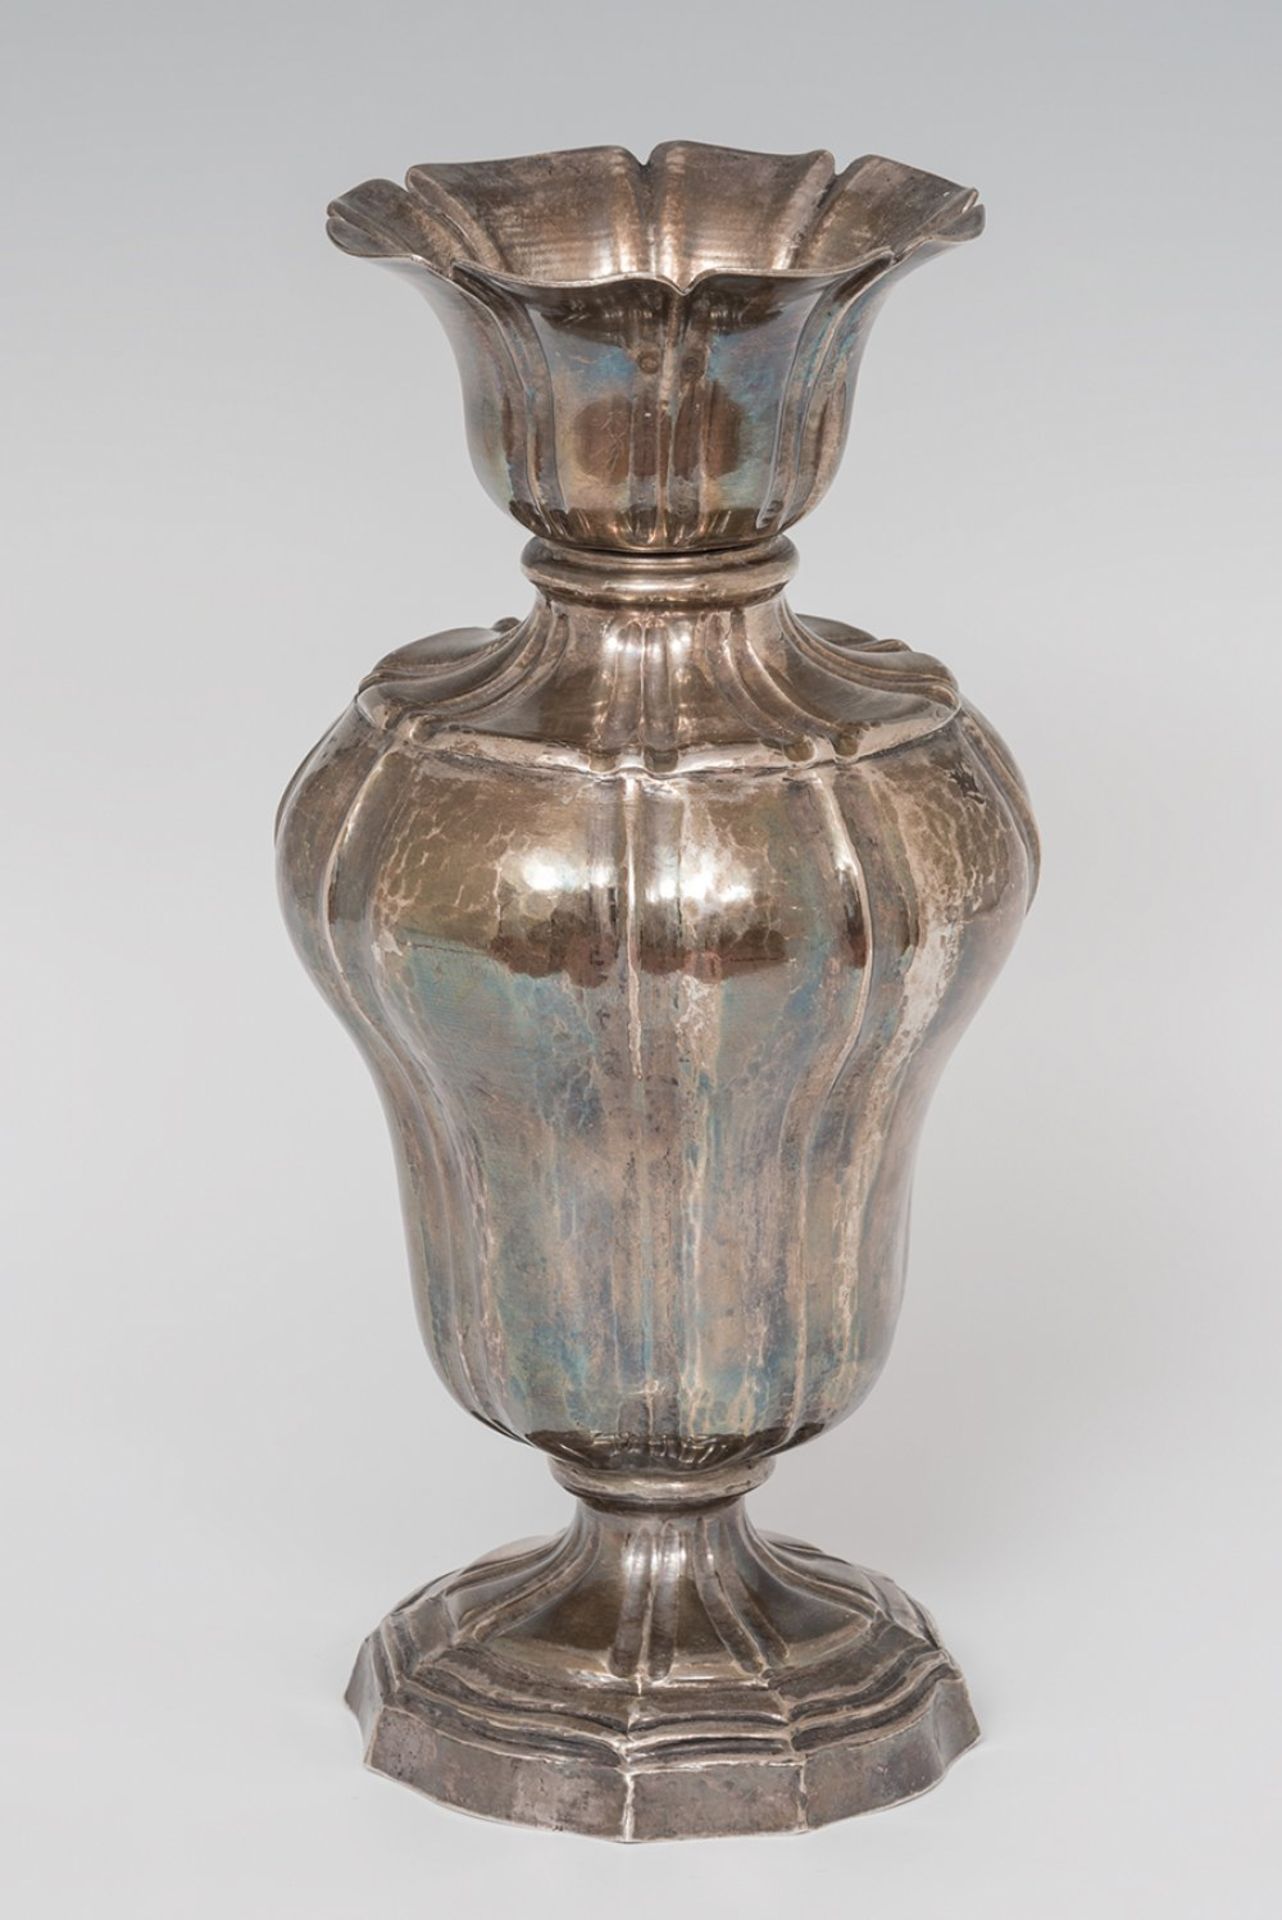 Altar vase in stamped silver. Mexico. 18th centuryWeight: 968.5 g. Measure: 27.5 x 14 cm.Vase - Image 4 of 6